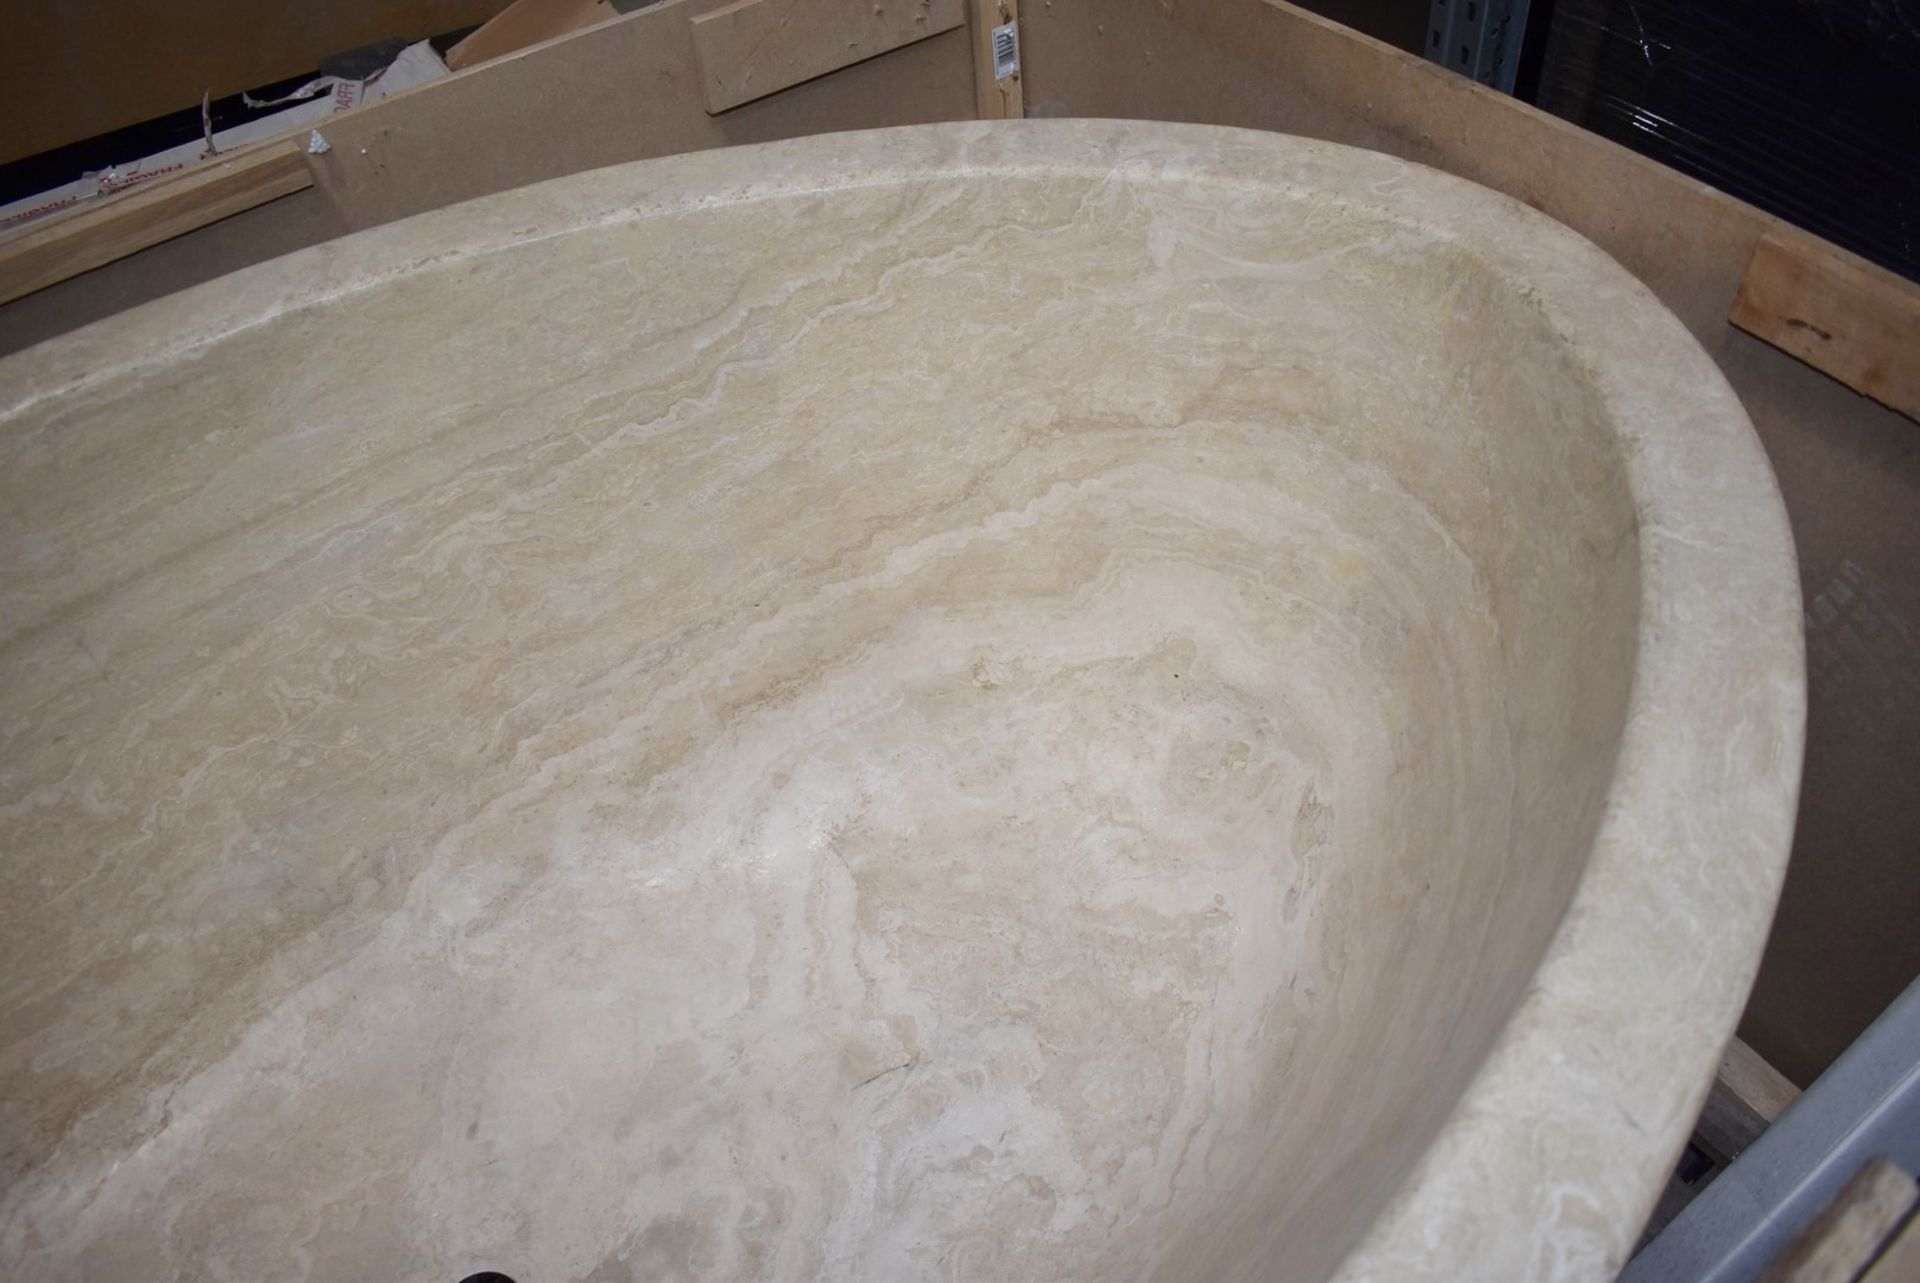 1 x Stonearth Luxury Grand Travertine Bath - Made From a Solid Piece of Stone - RRP £19,000 - New! - Image 12 of 25